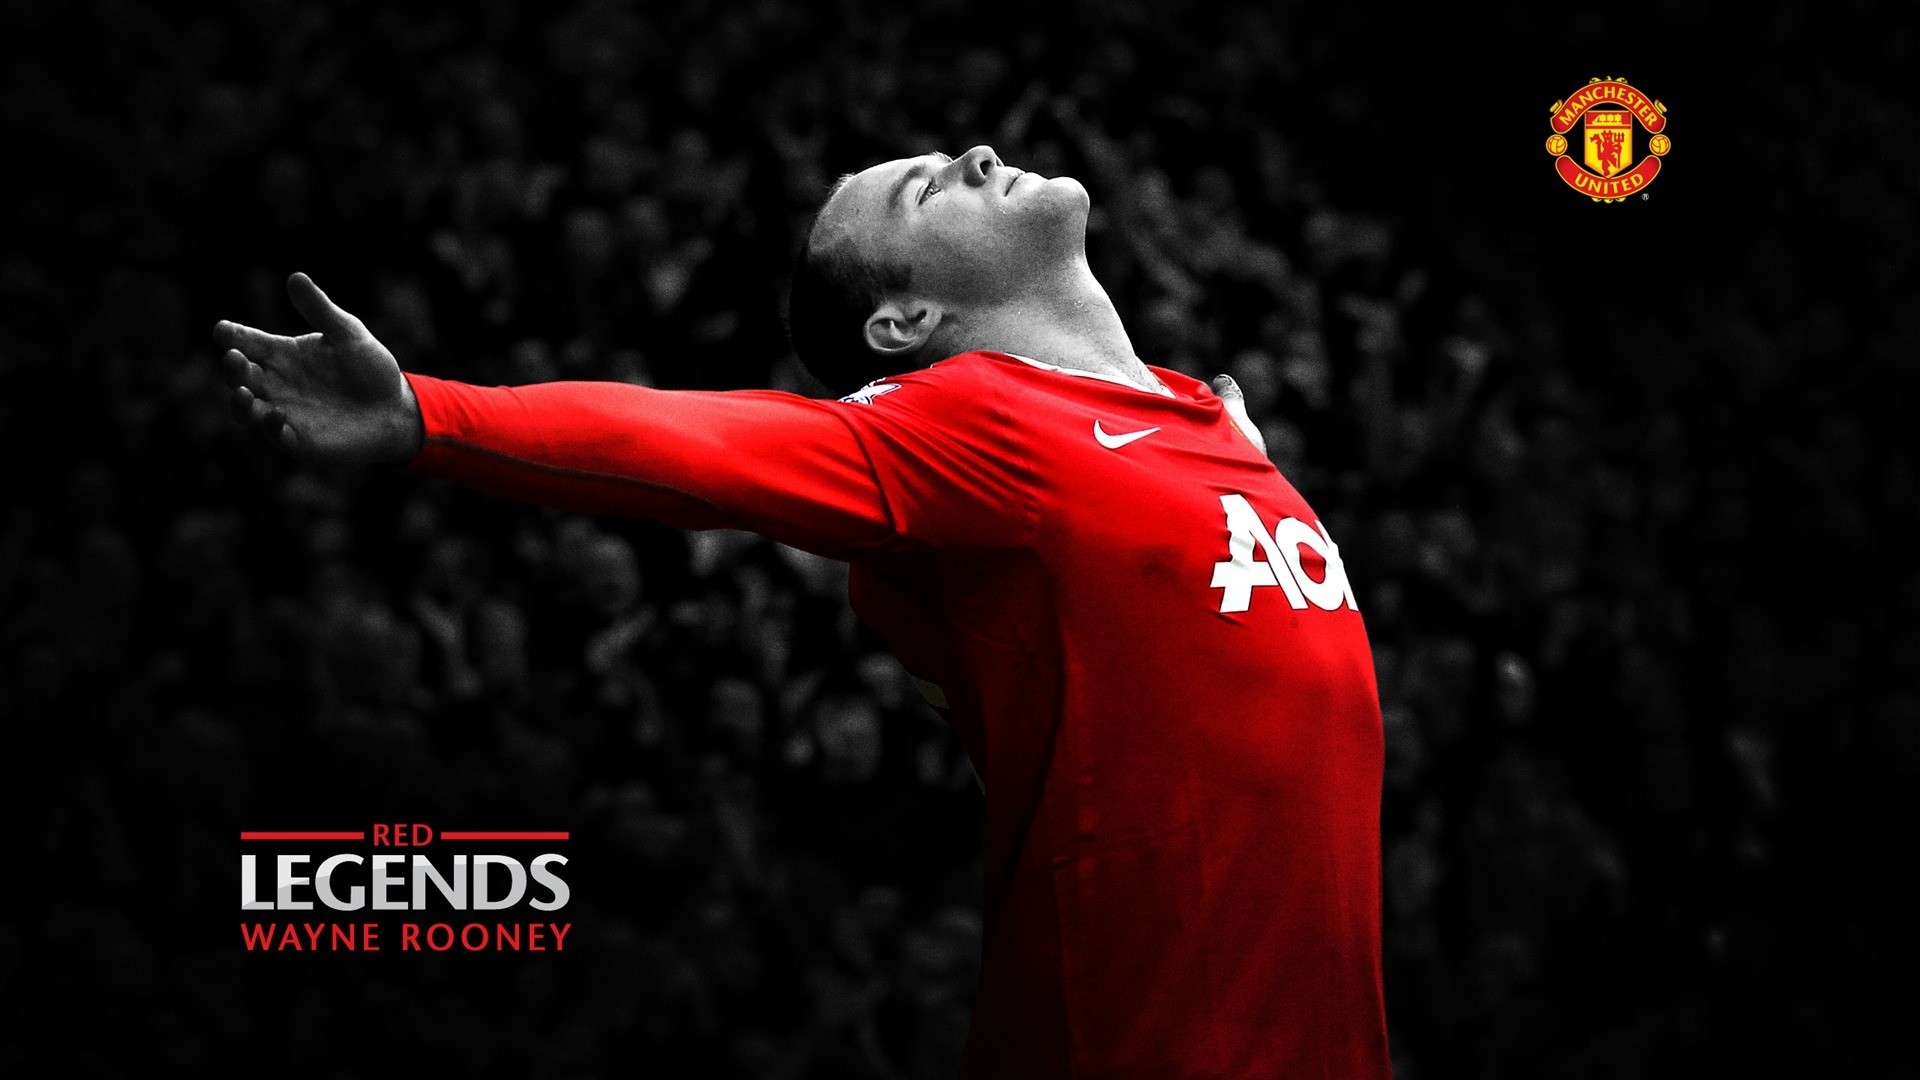 1920x1080 Manchester United High Definition Wallpapers 1080p.